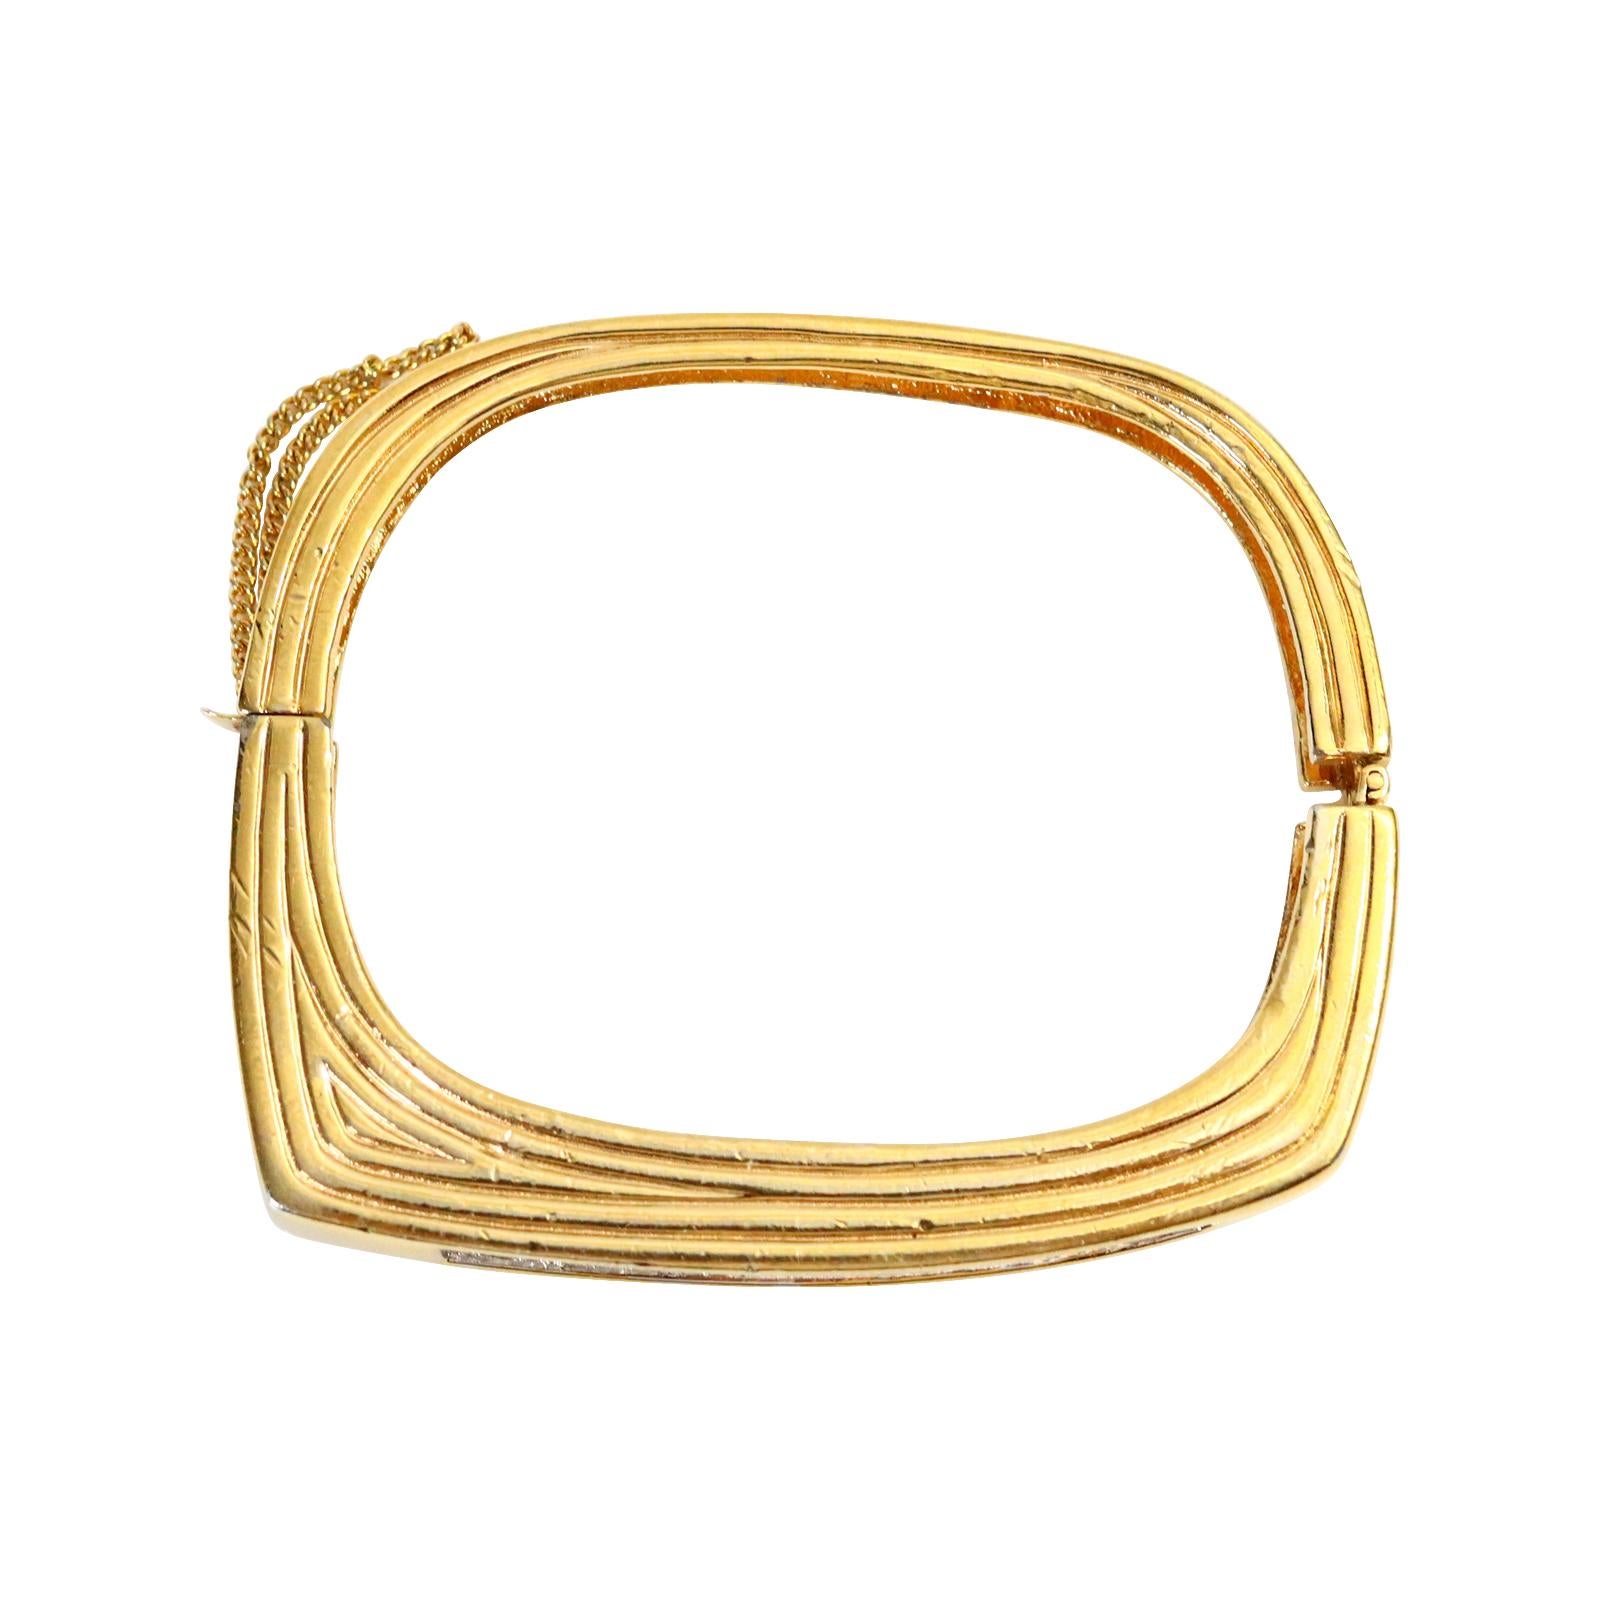 Vintage Panetta Gold Diamante Bracelet Circa 1970s.  The outside is square with inset pave stones while the inside is an oval so it will be comfortable to wear. The Style is so well made that it does resemble fine though as a famous designer from